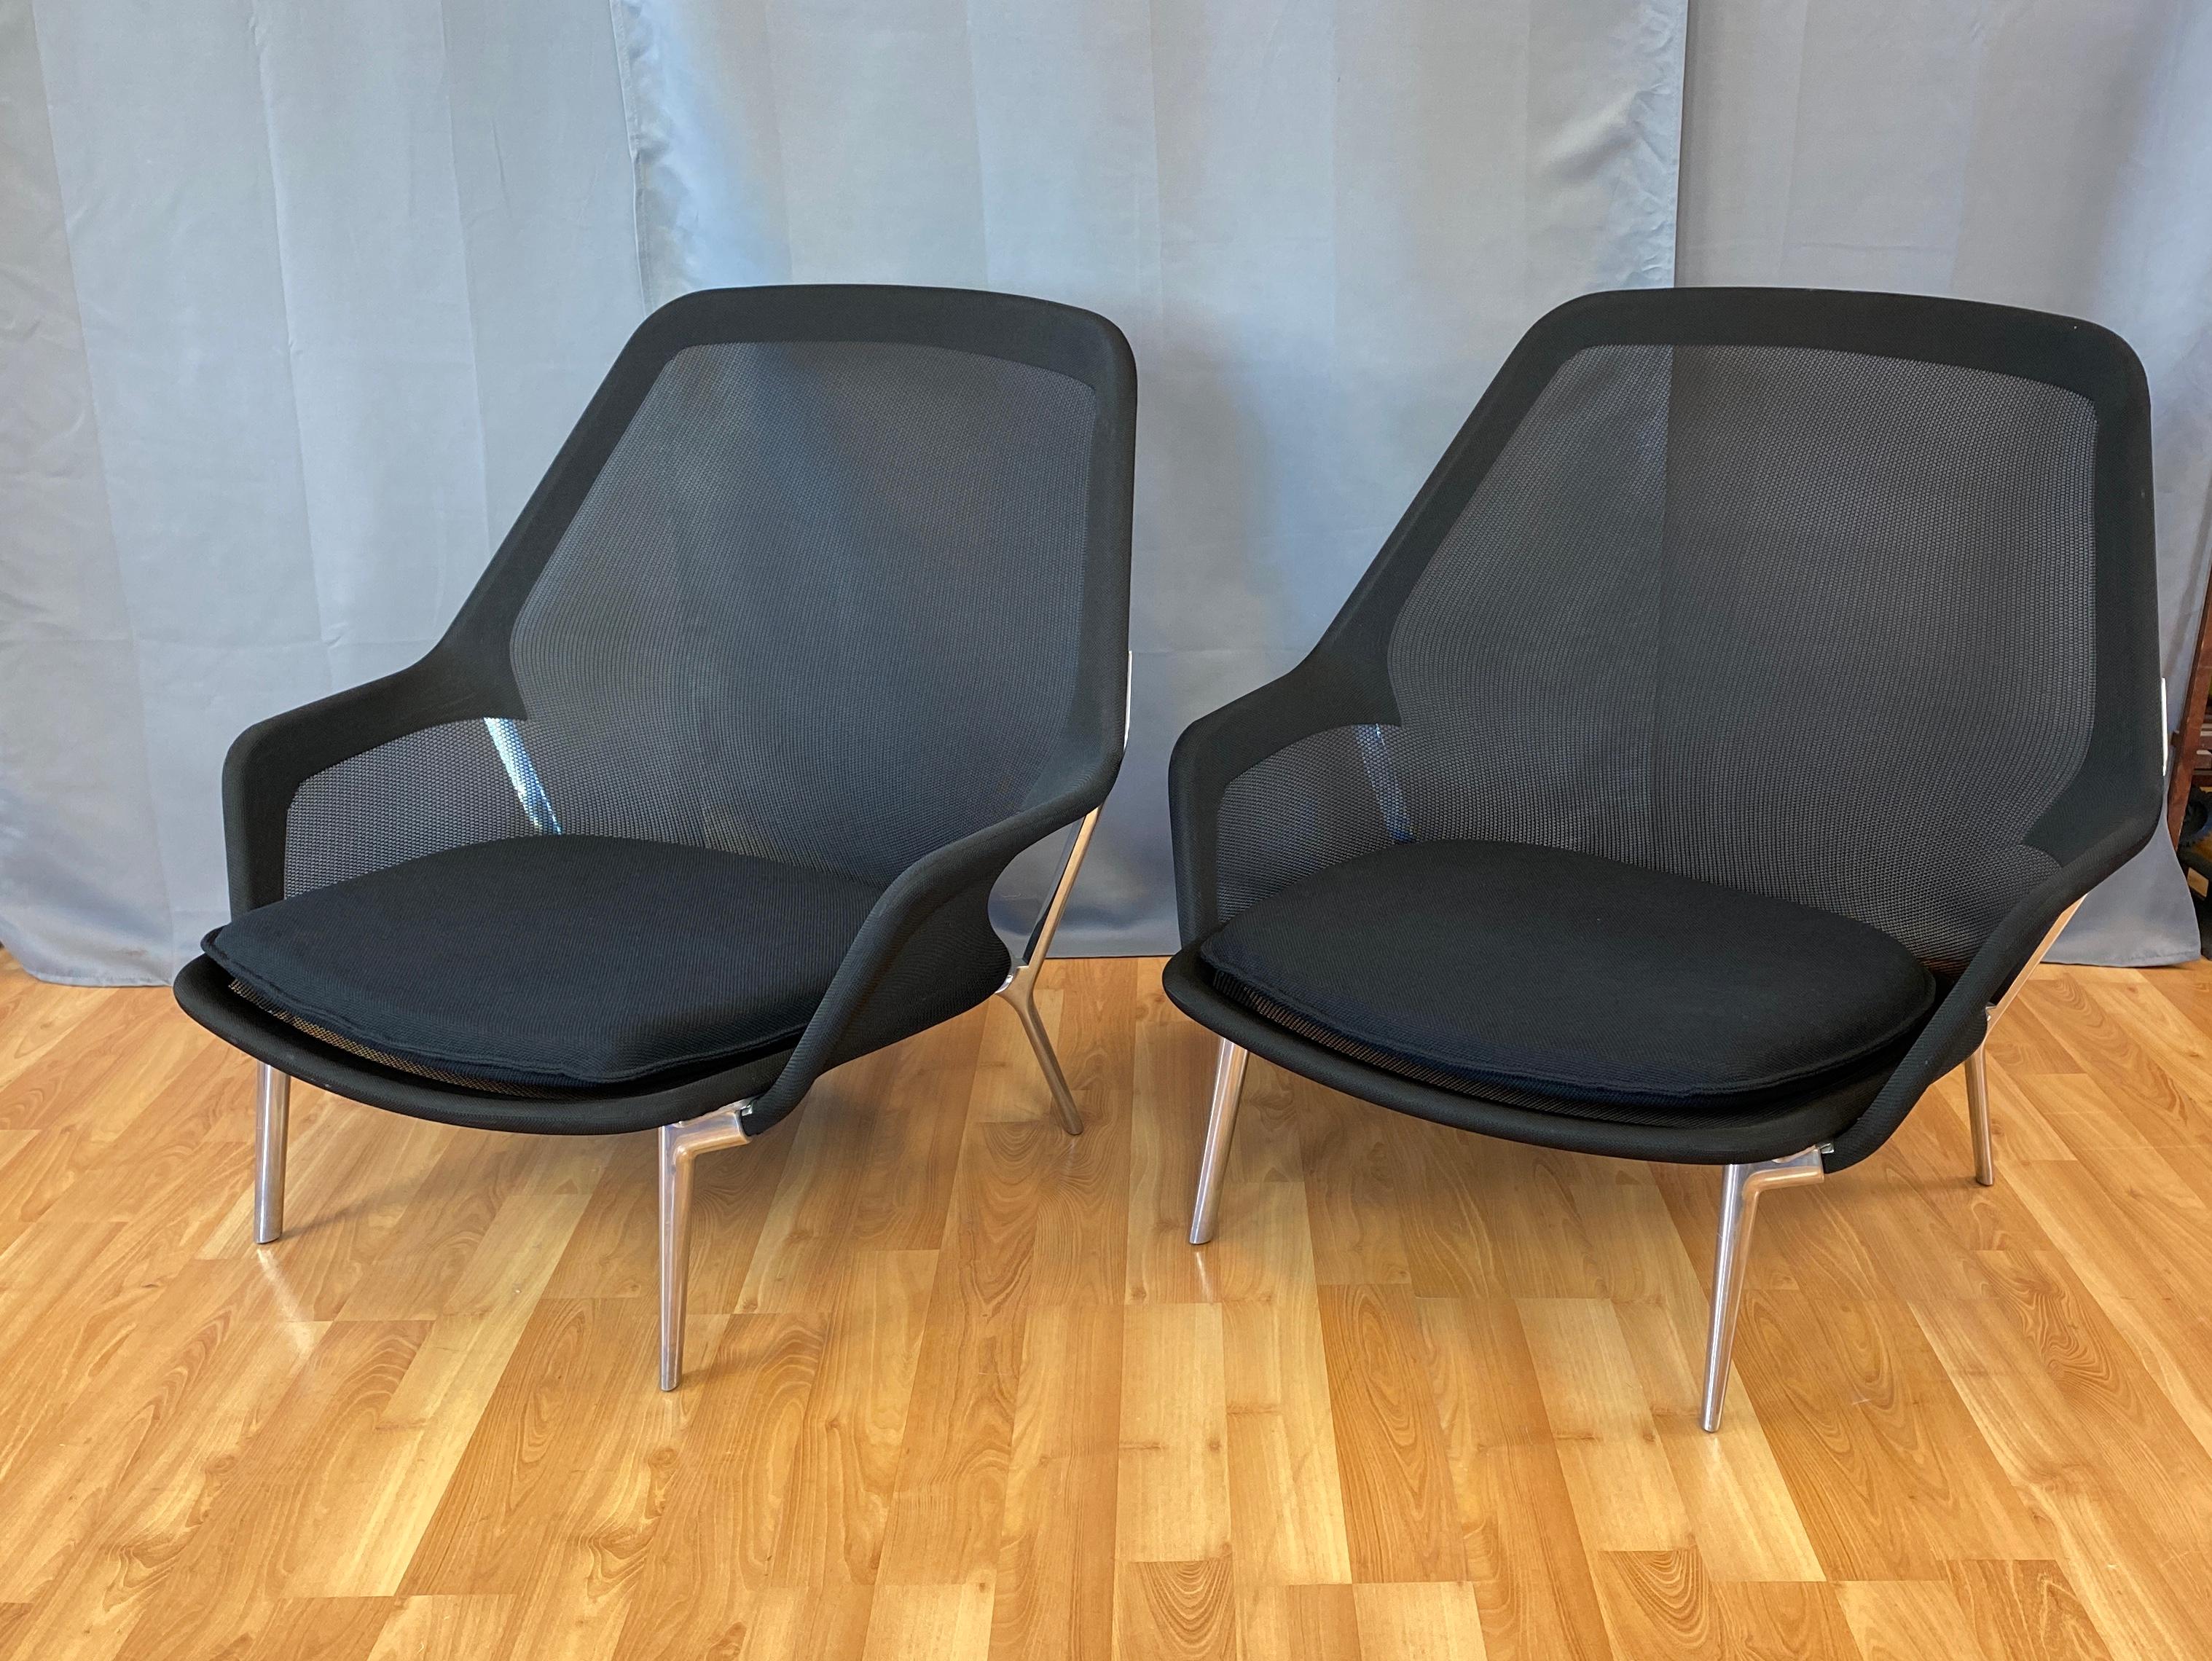 Offered here are a pair slow chairs by Ronan and Erwan Bouroullec for Vitra, first designed in 2006. 
Both in black with polished Aluminum frames.

From Vitra's web site..:
Ronan and Erwan Bouroullec created this expansive armchair by using an